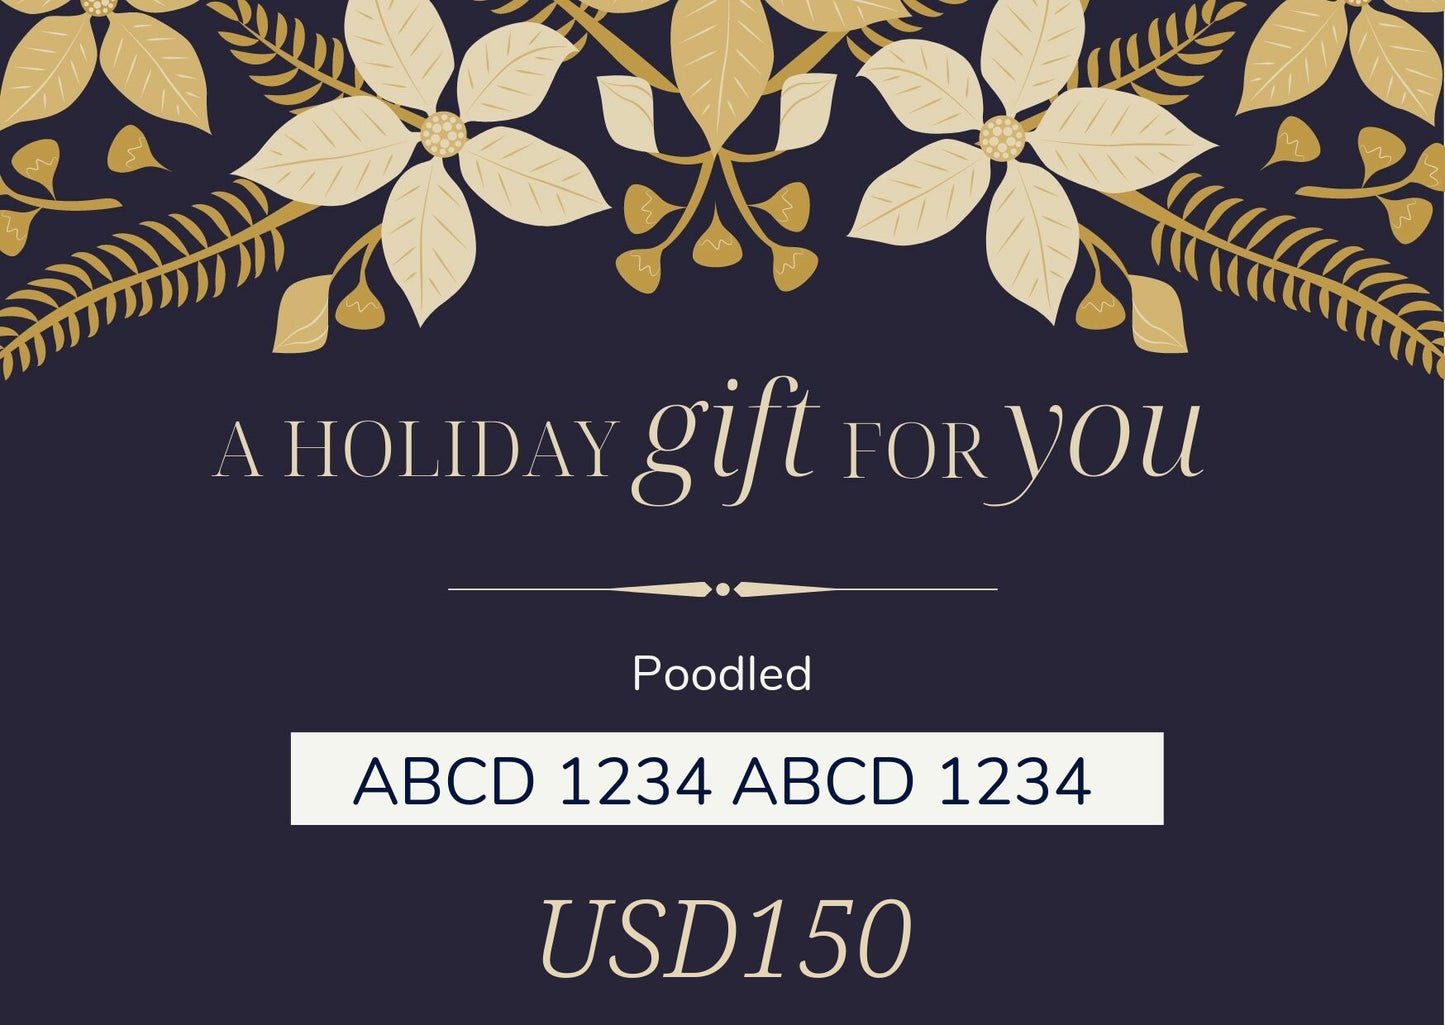 Gift Card - USD150 - Poodled